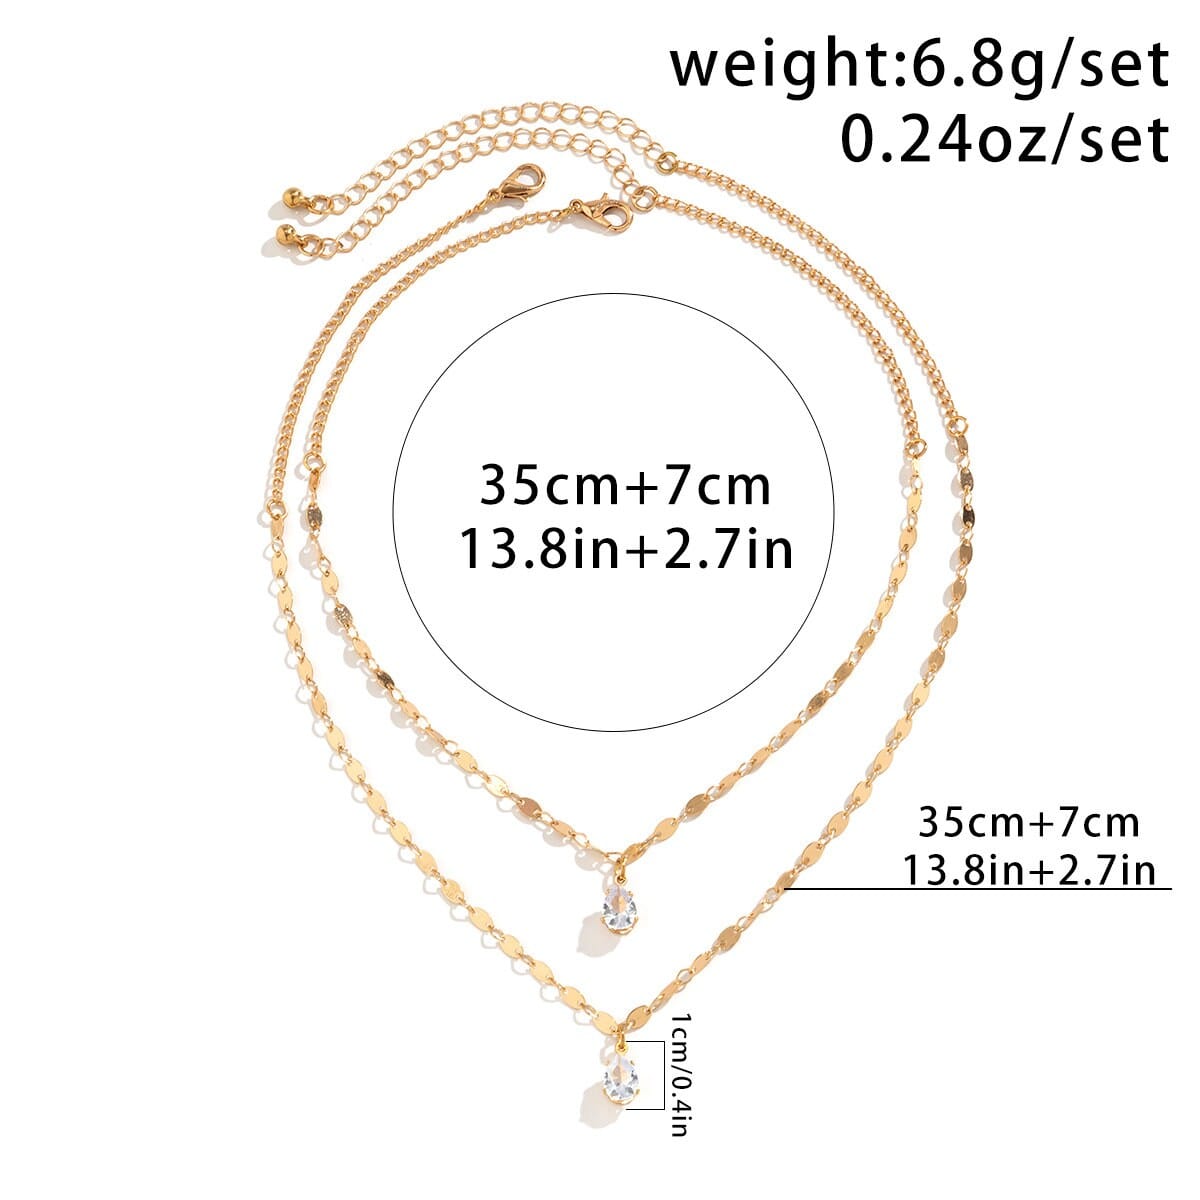 FAMARINE Gold Layered Necklace, 3 Layer Choker Necklace Chain Pendant  Costume Jewelry for Women